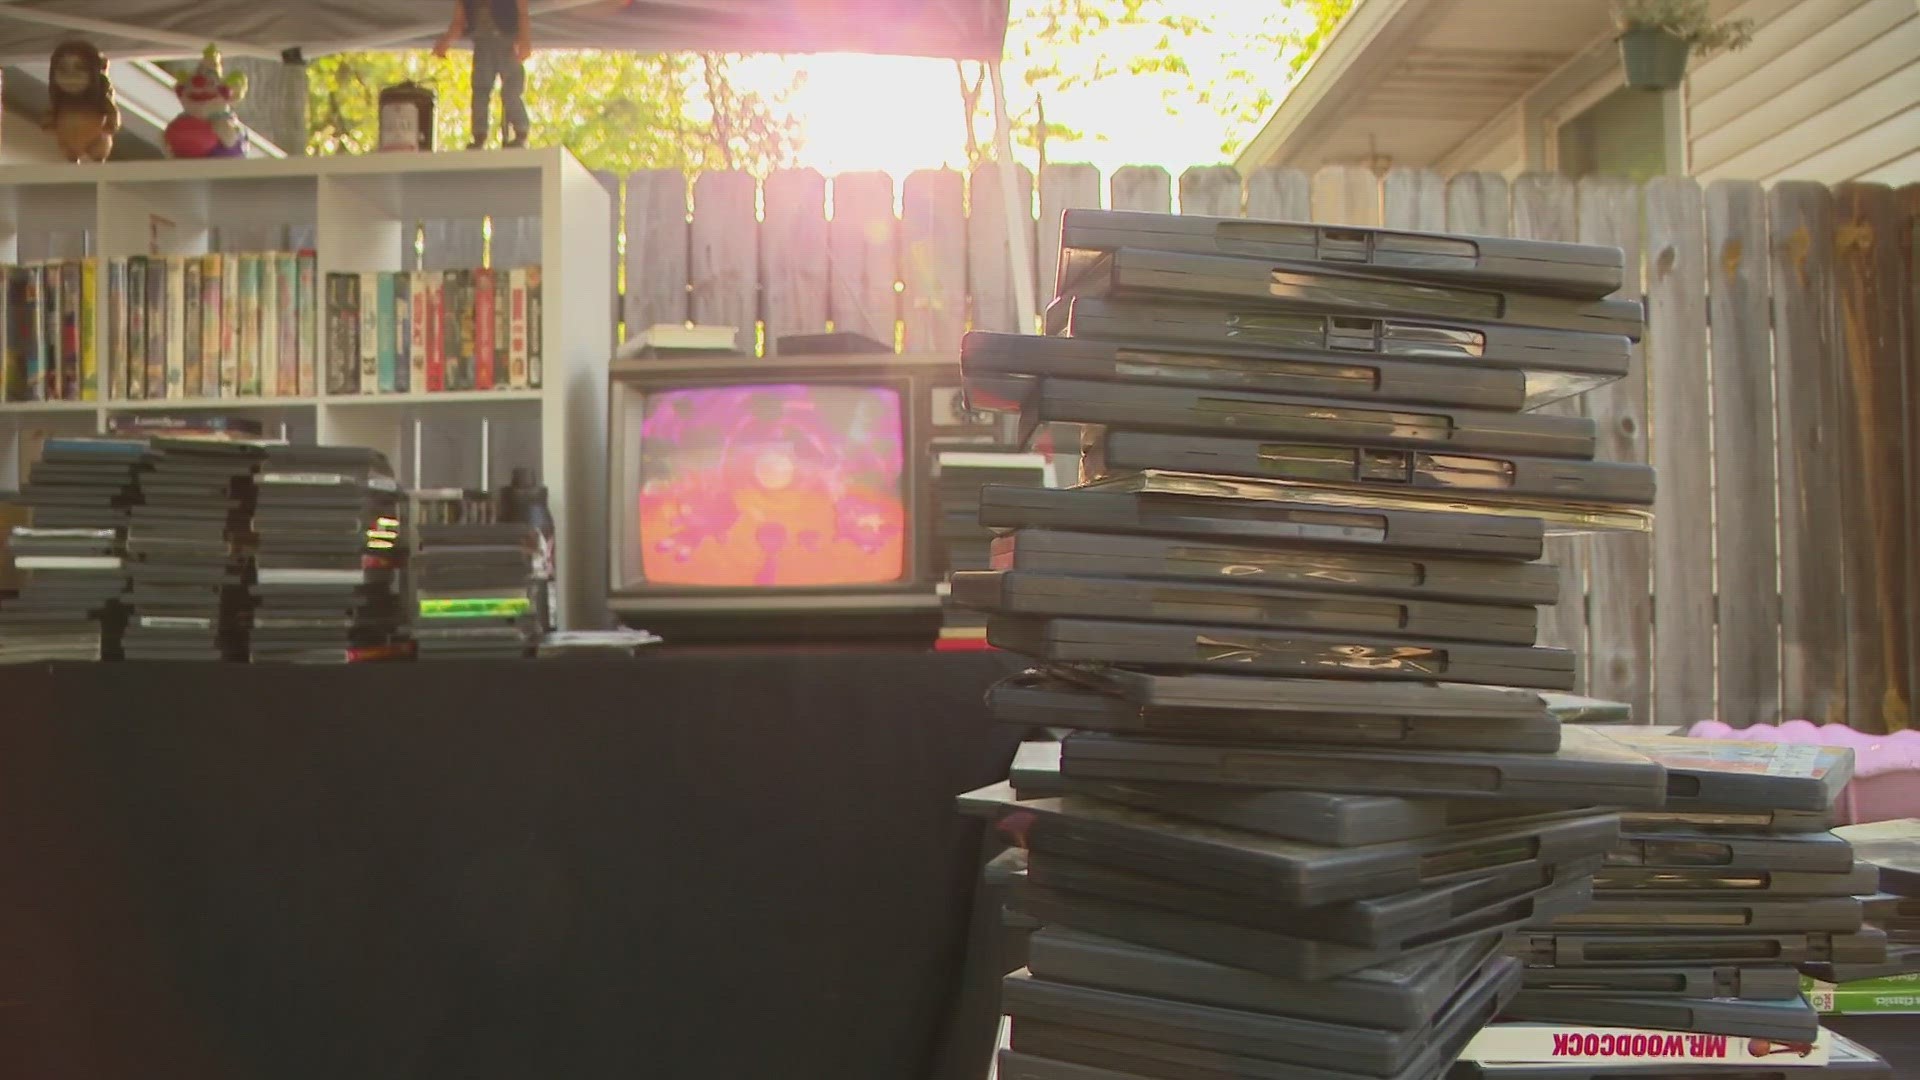 Similar to "Little Free Libraries," the idea of the "Free Blockbuster" is to donate and take a movie.